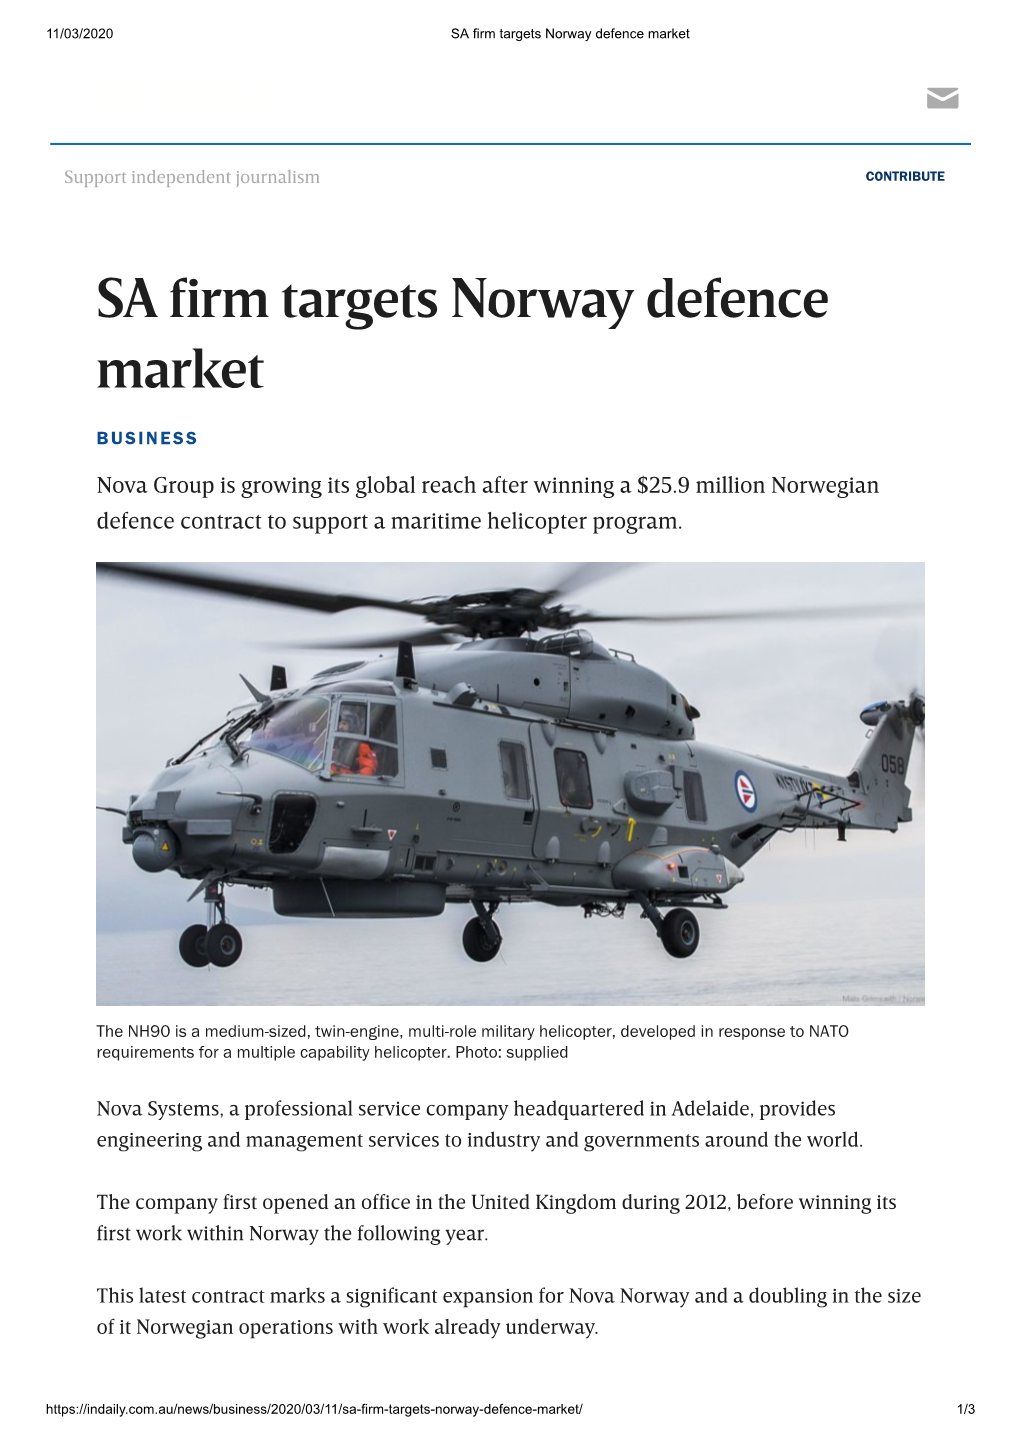 SA Firm Targets Norway Defence Market